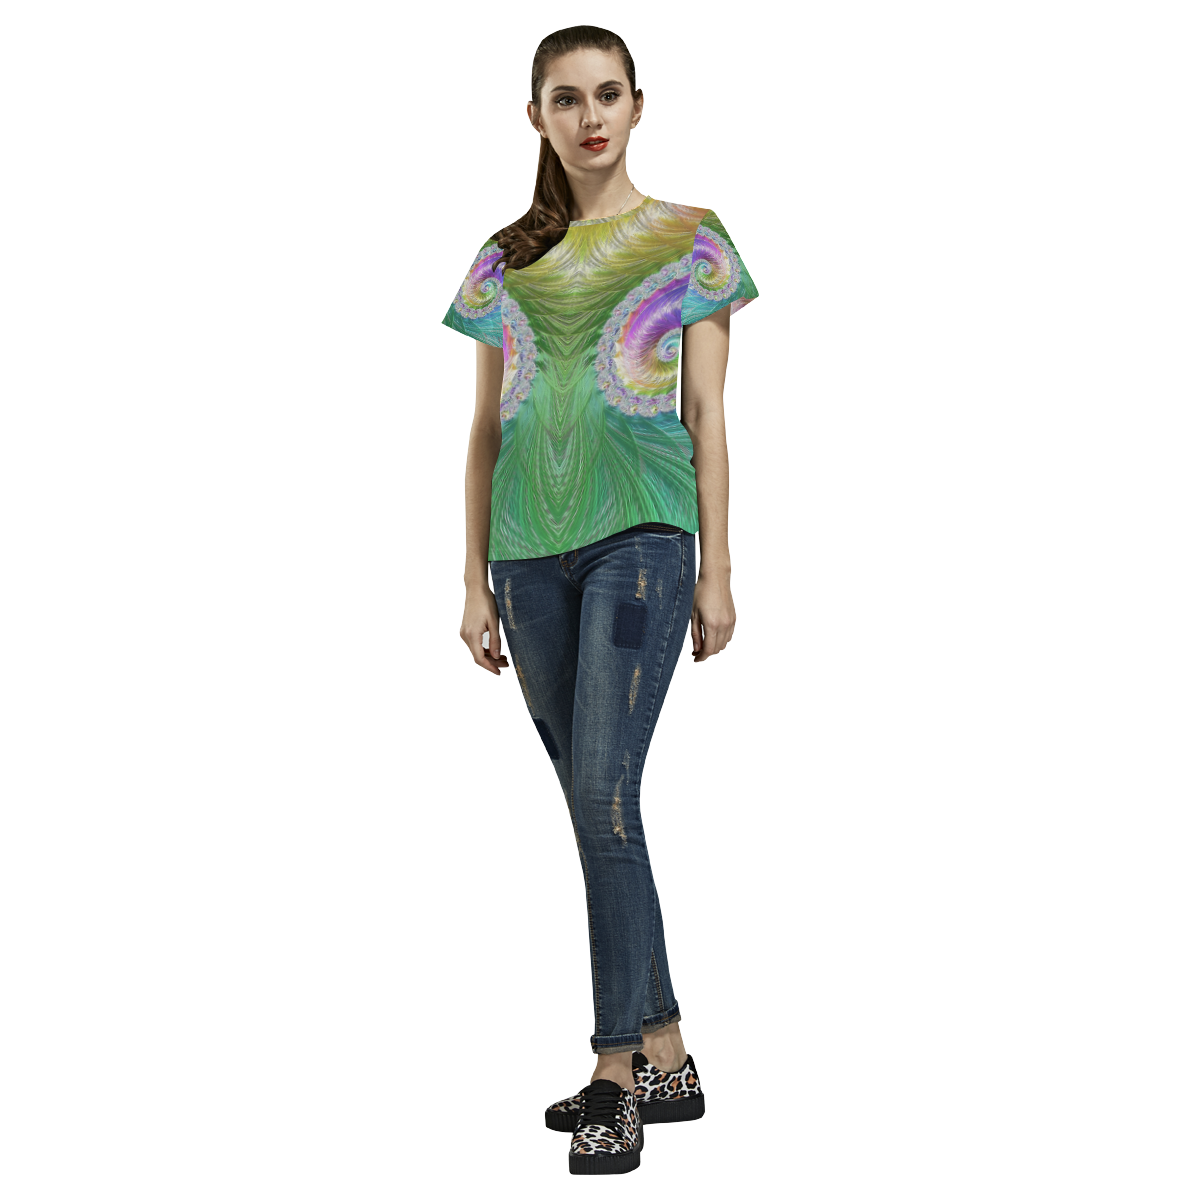 Frax Fractal Rainbow All Over Print T-Shirt for Women (USA Size) (Model T40)